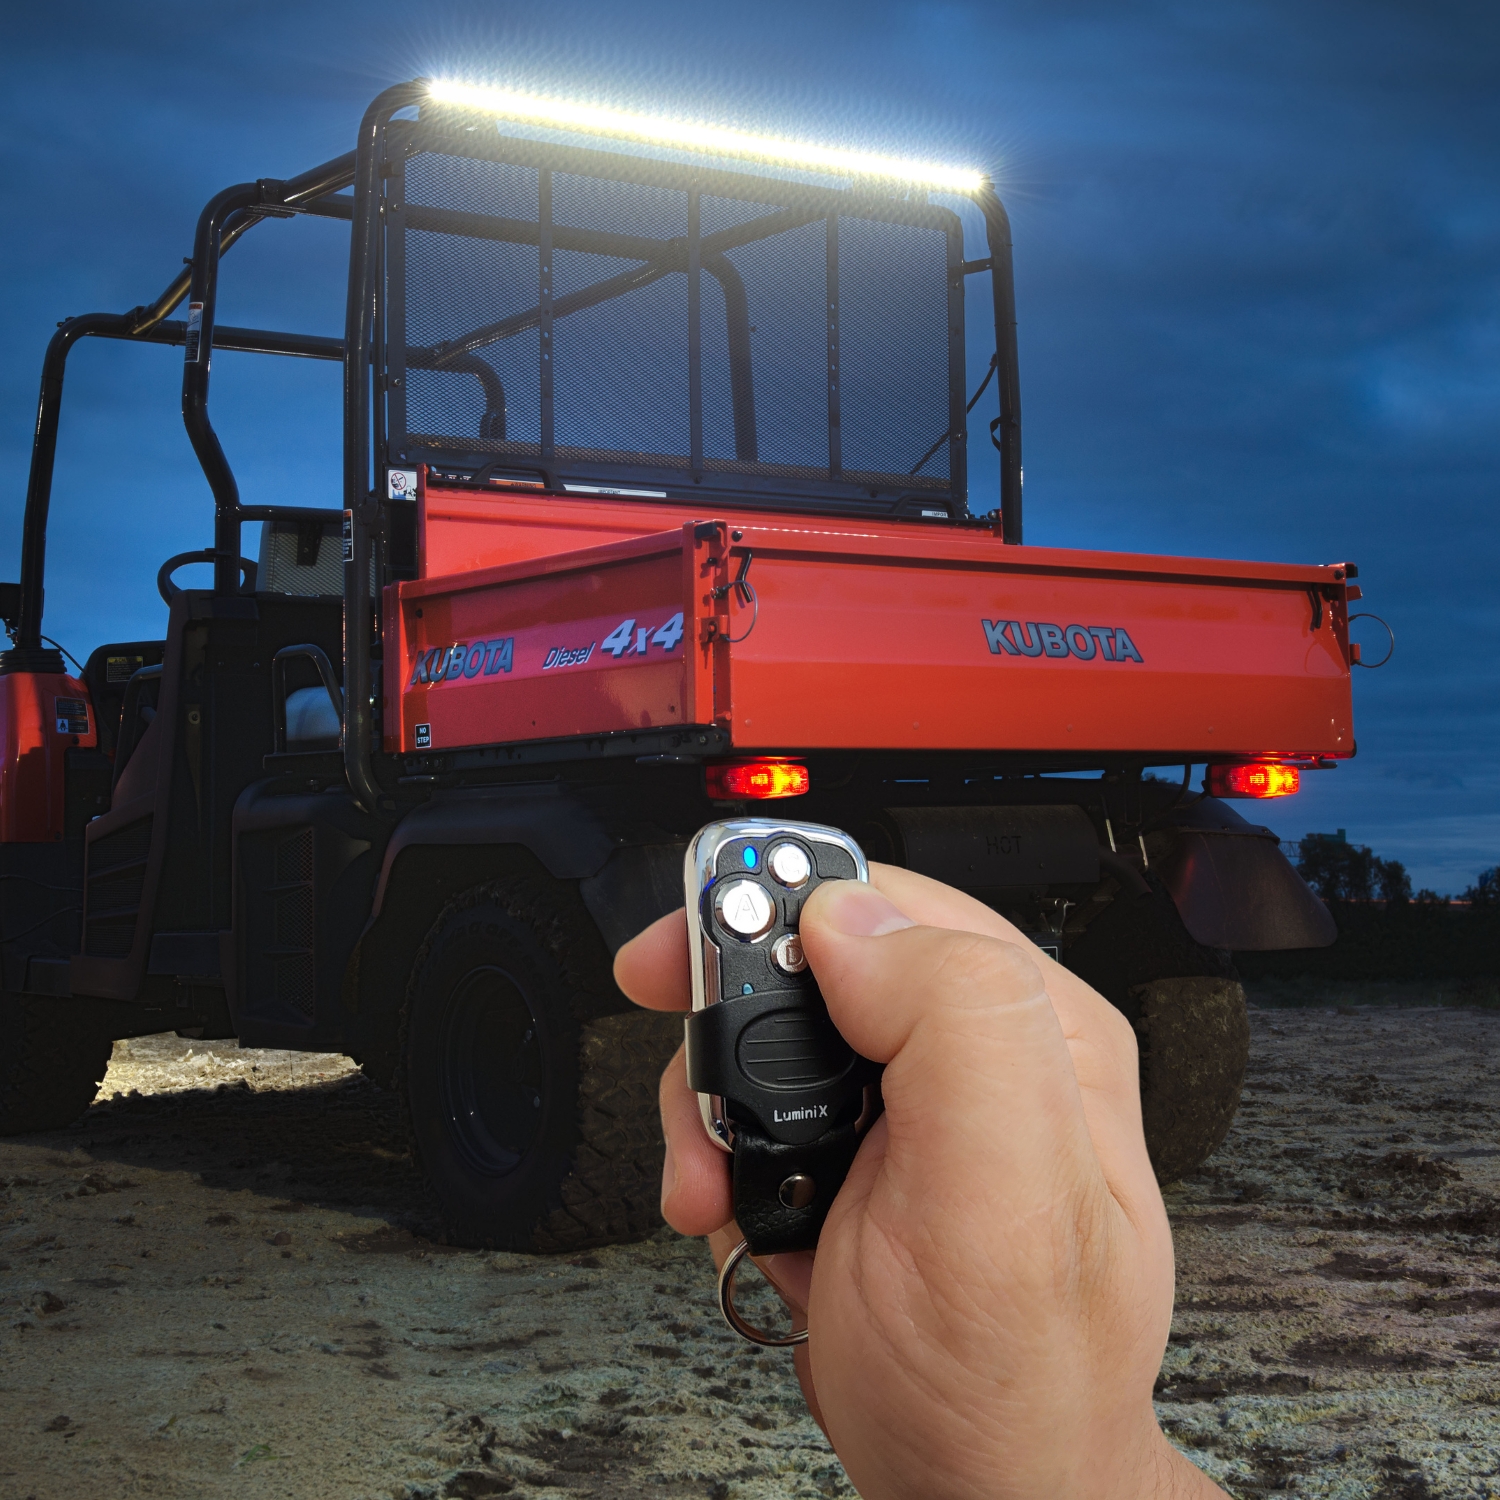 https://www.putco.com/wp-content/uploads/Putco-Luminix-Wireless-Remote-Unleashing-the-Power-of-High-Power-LED-Light-Bars-Suited-for-Search-Rescue.jpg